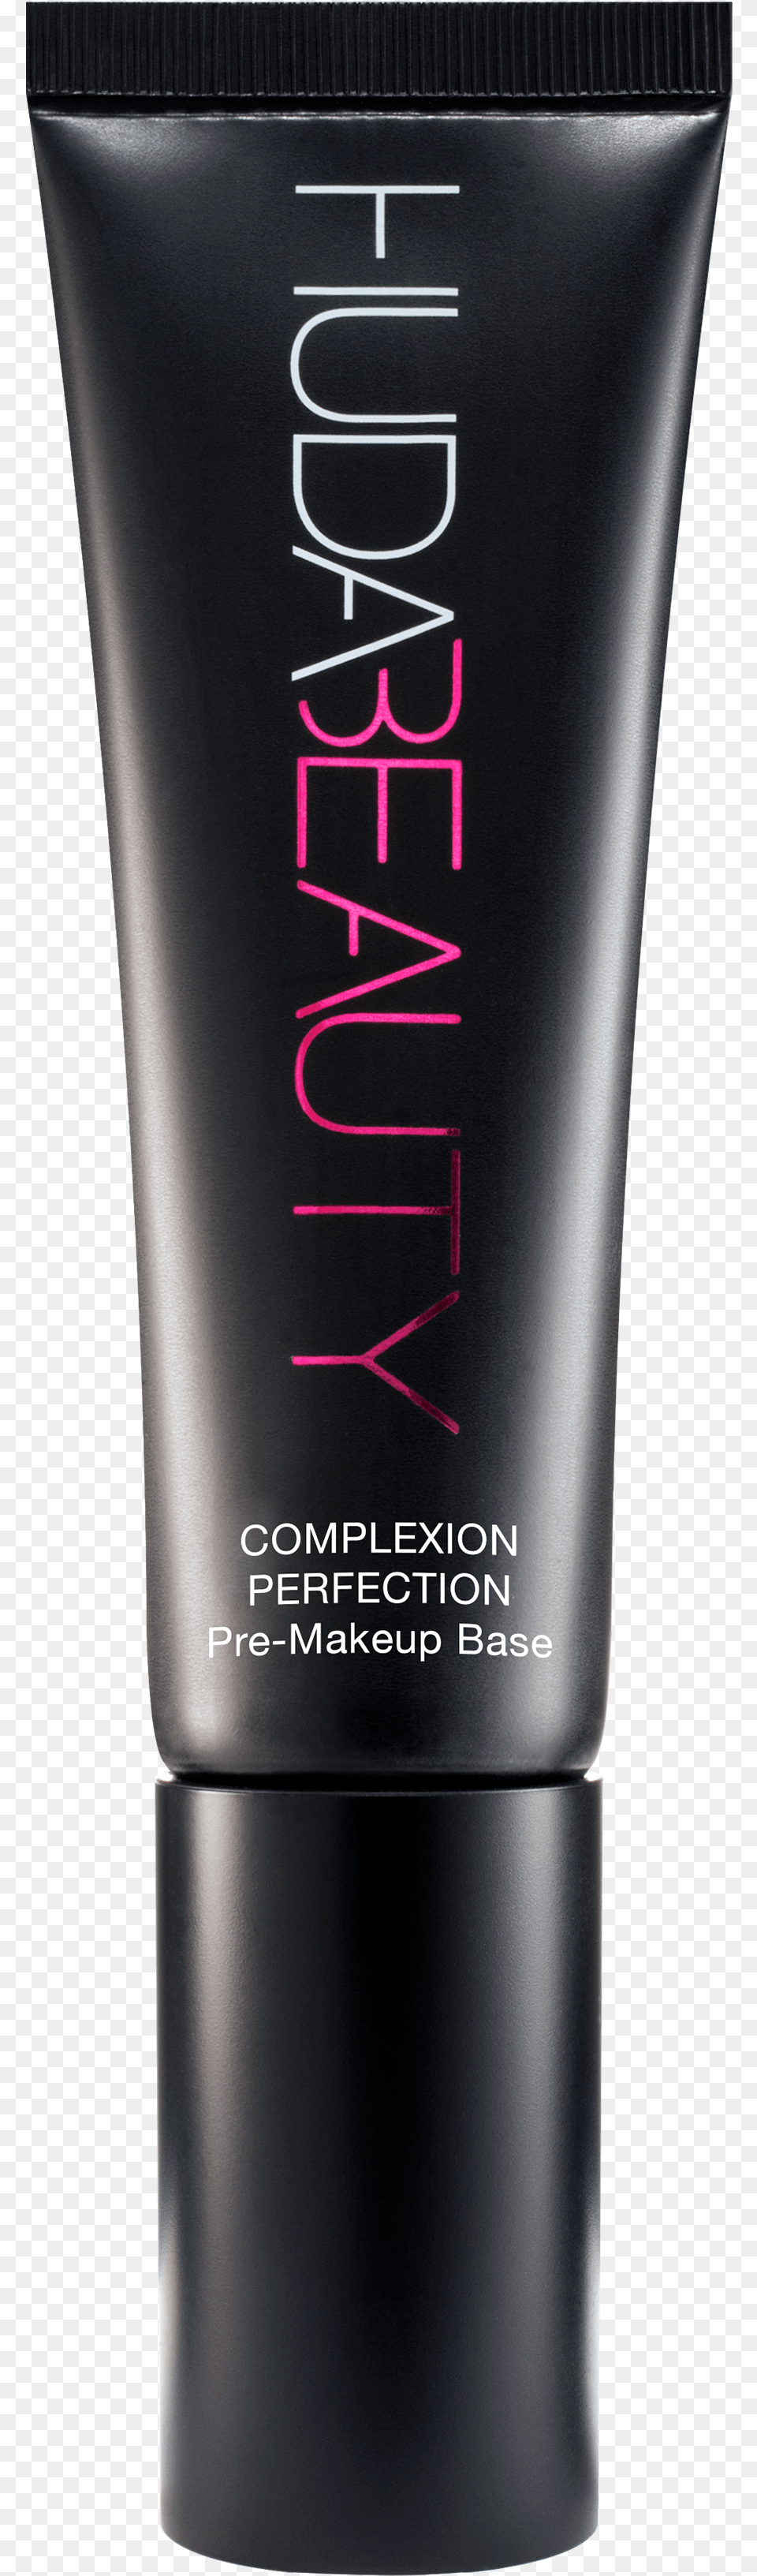 I Tried Huda Beauty39s Vagisil Inspired Primer Amp It No7 Men Energising Eye Roll, Bottle, Aftershave, Cosmetics Png Image